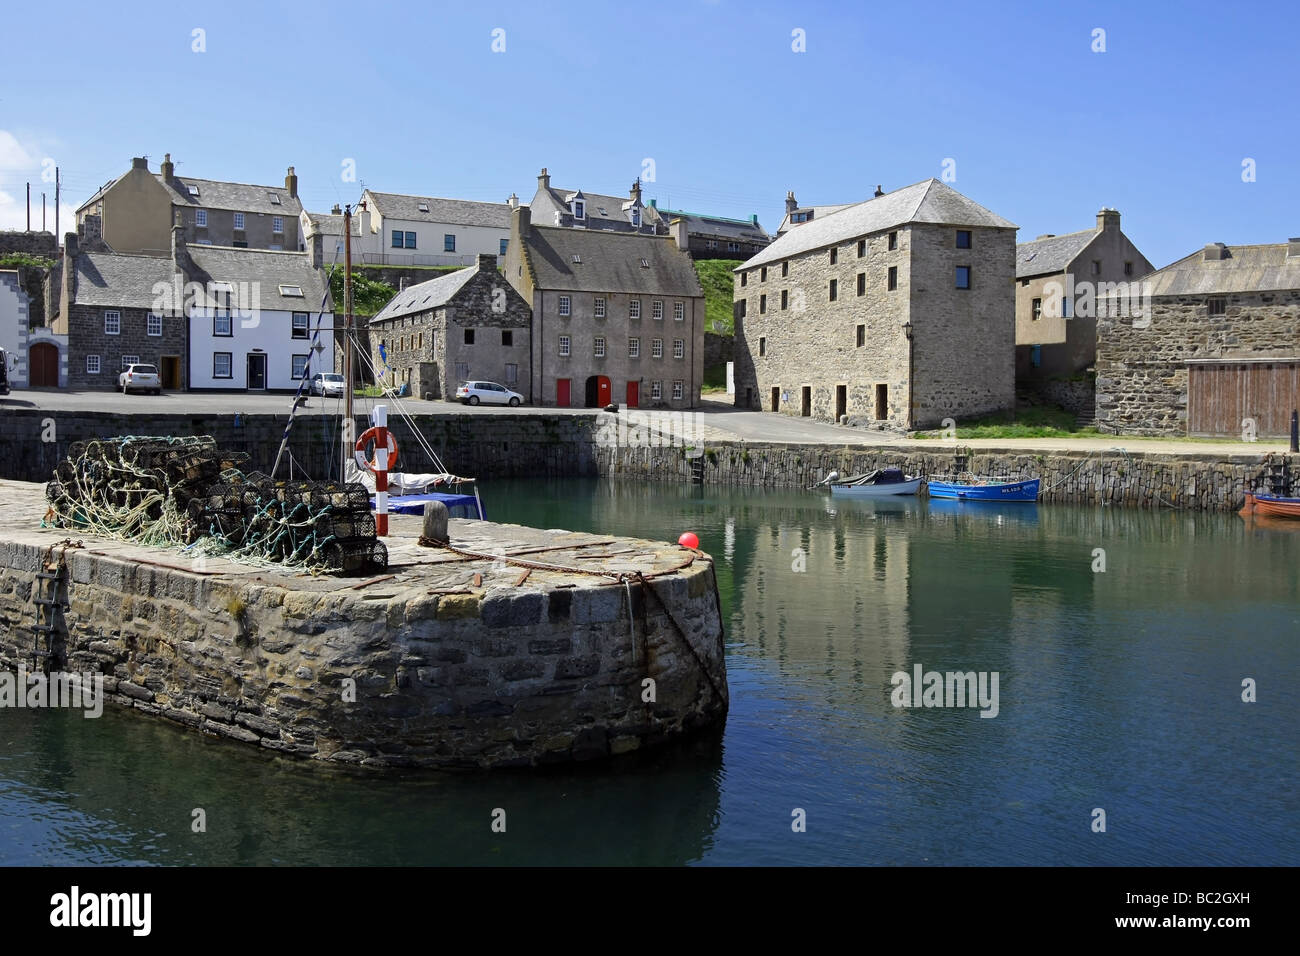 The historic harbour of Portsoy, Aberdeenshire, Scotland, UK, which hosts the Boat Festival annually Stock Photo